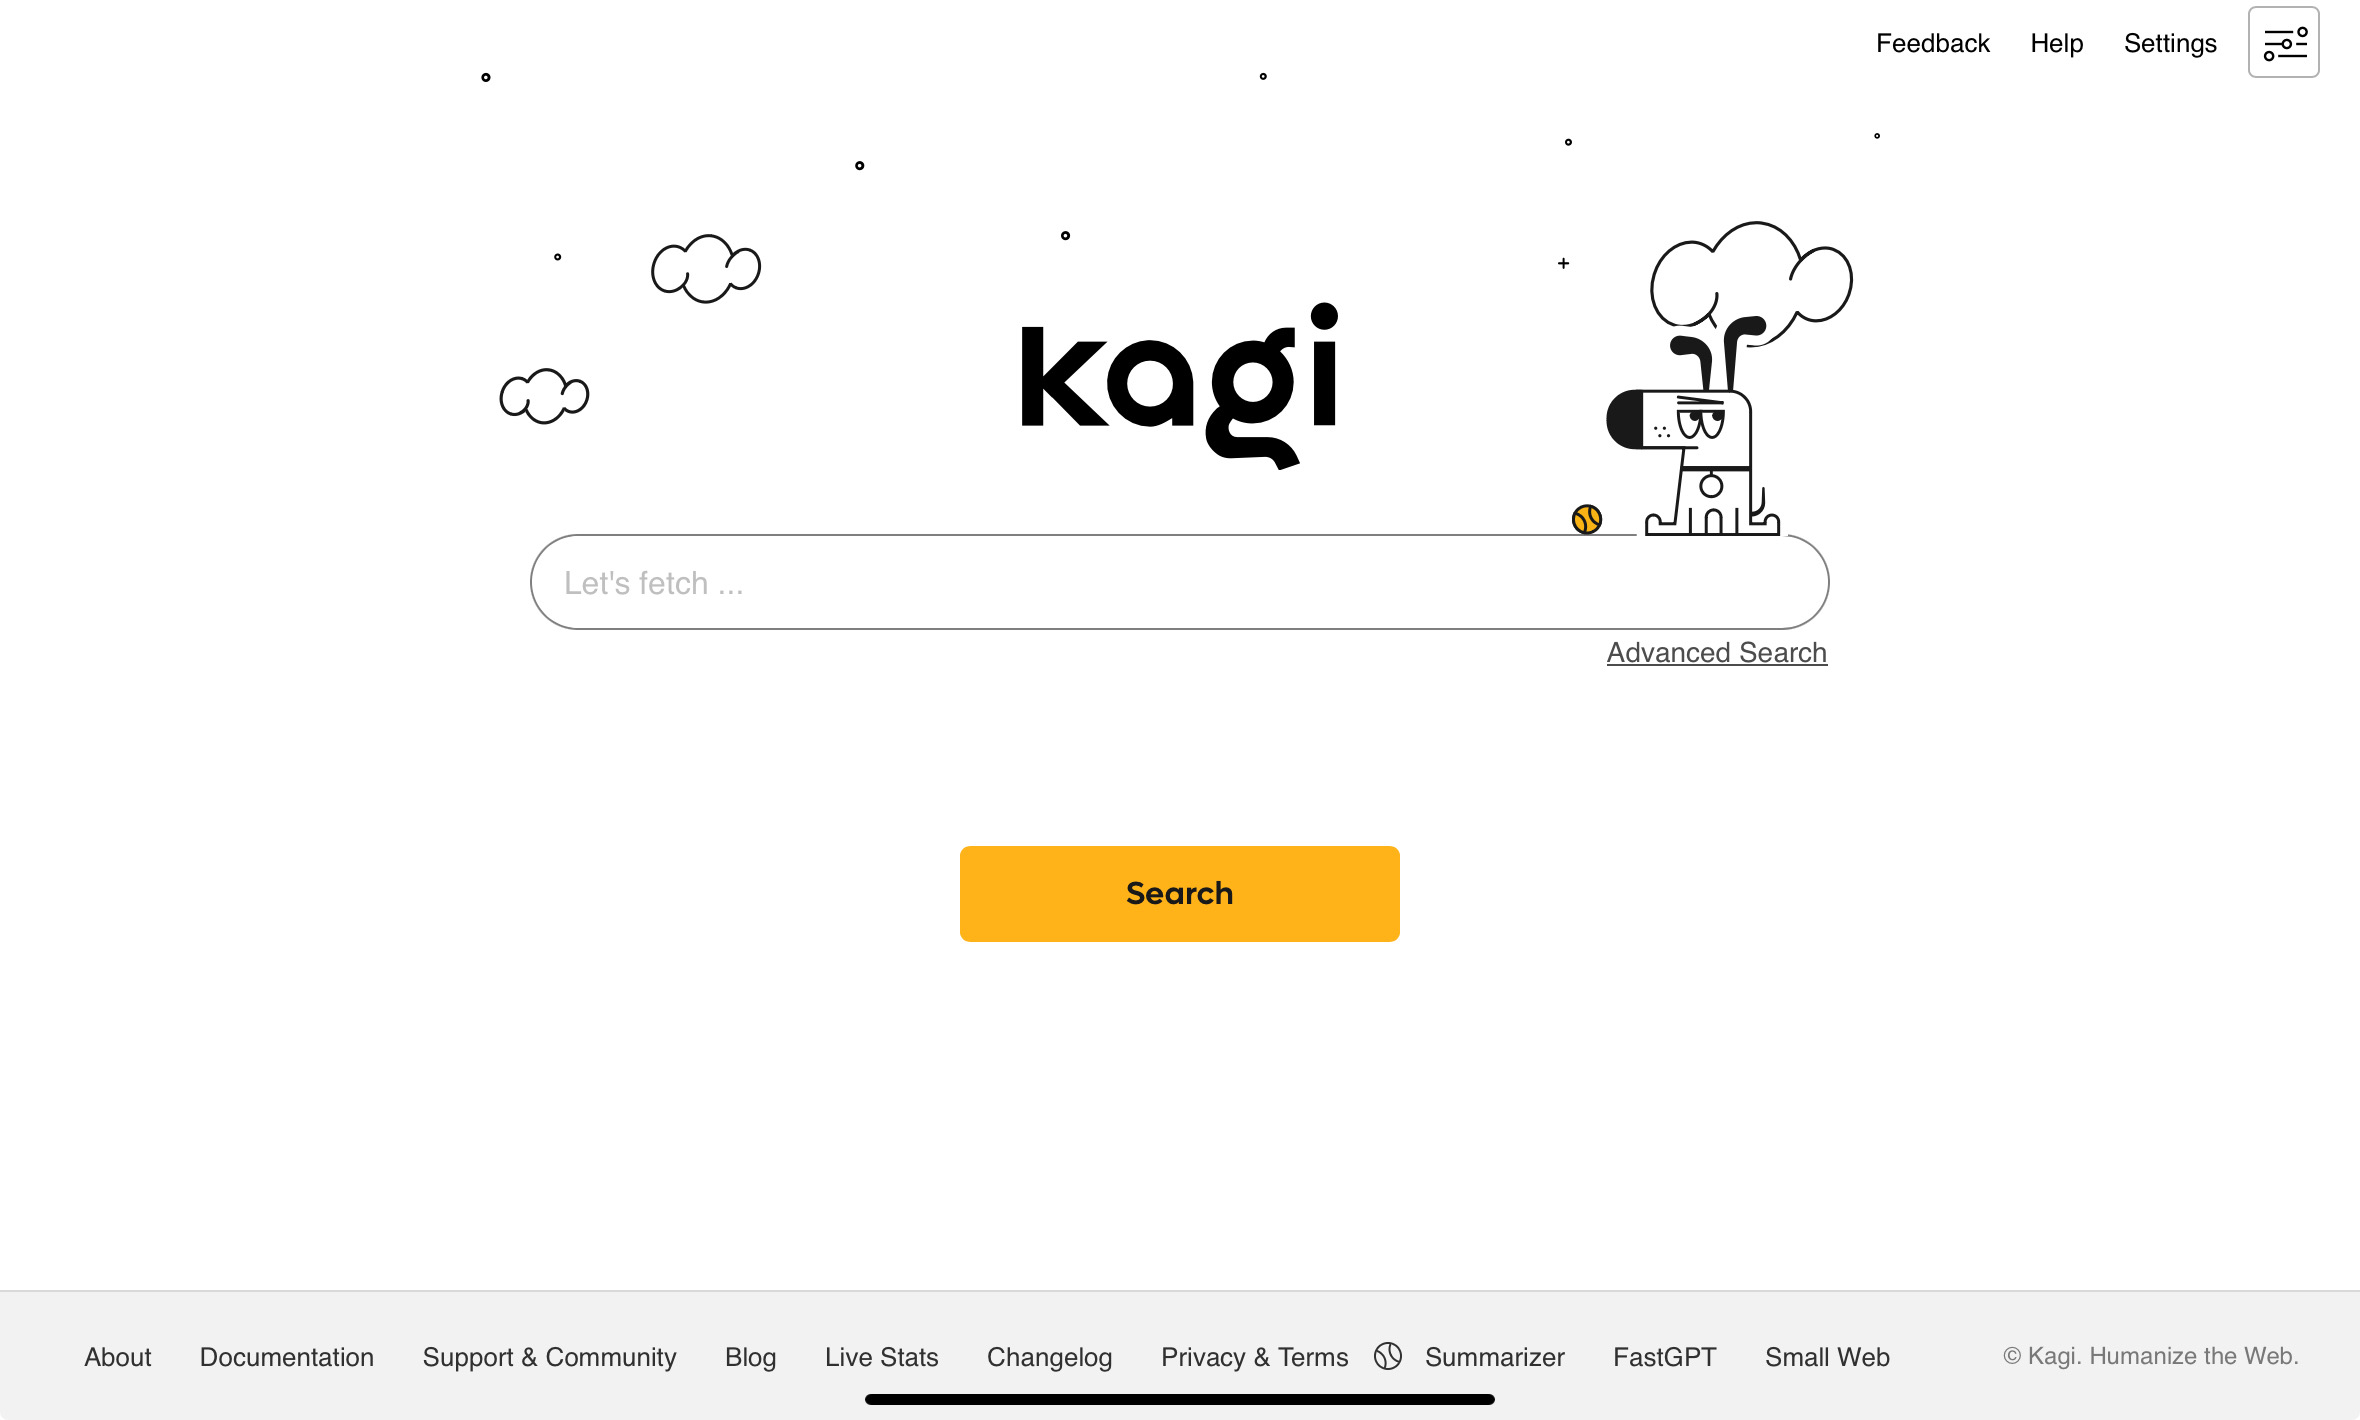 Kagi: a paid search engine which is worth the money